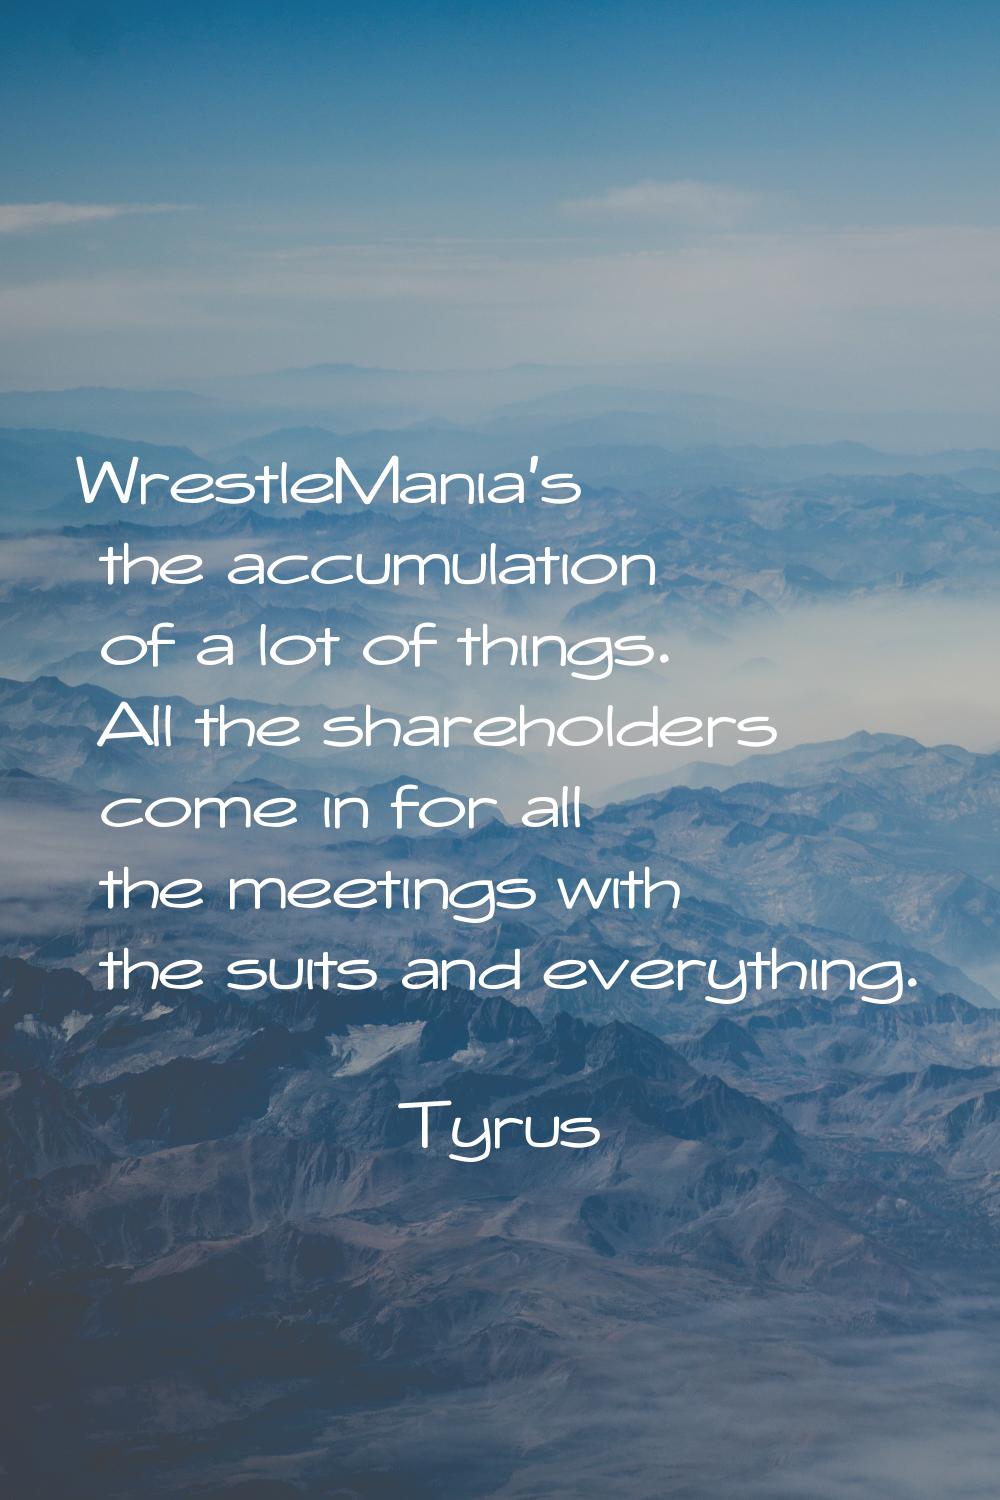 WrestleMania's the accumulation of a lot of things. All the shareholders come in for all the meetin